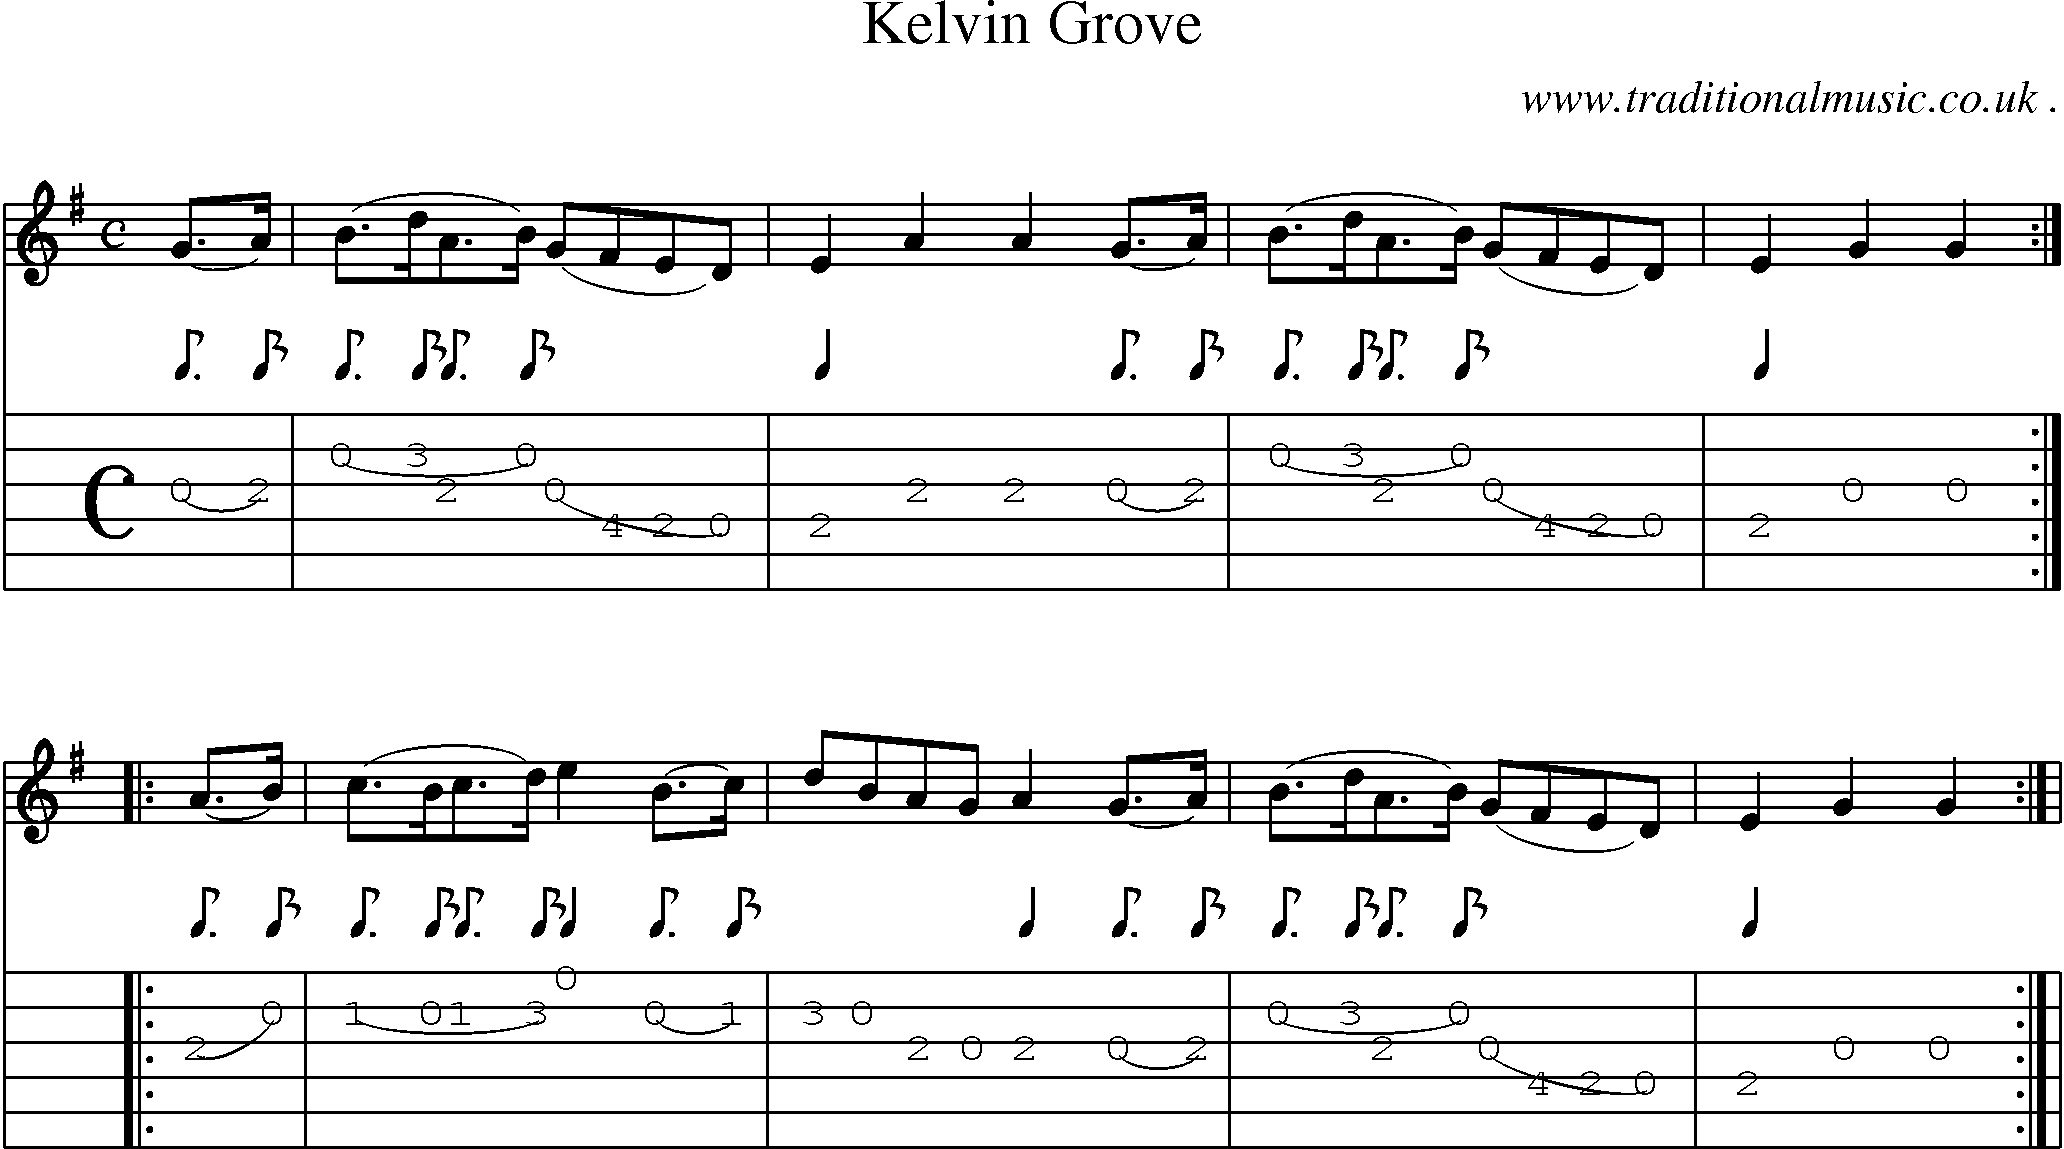 Sheet-Music and Guitar Tabs for Kelvin Grove